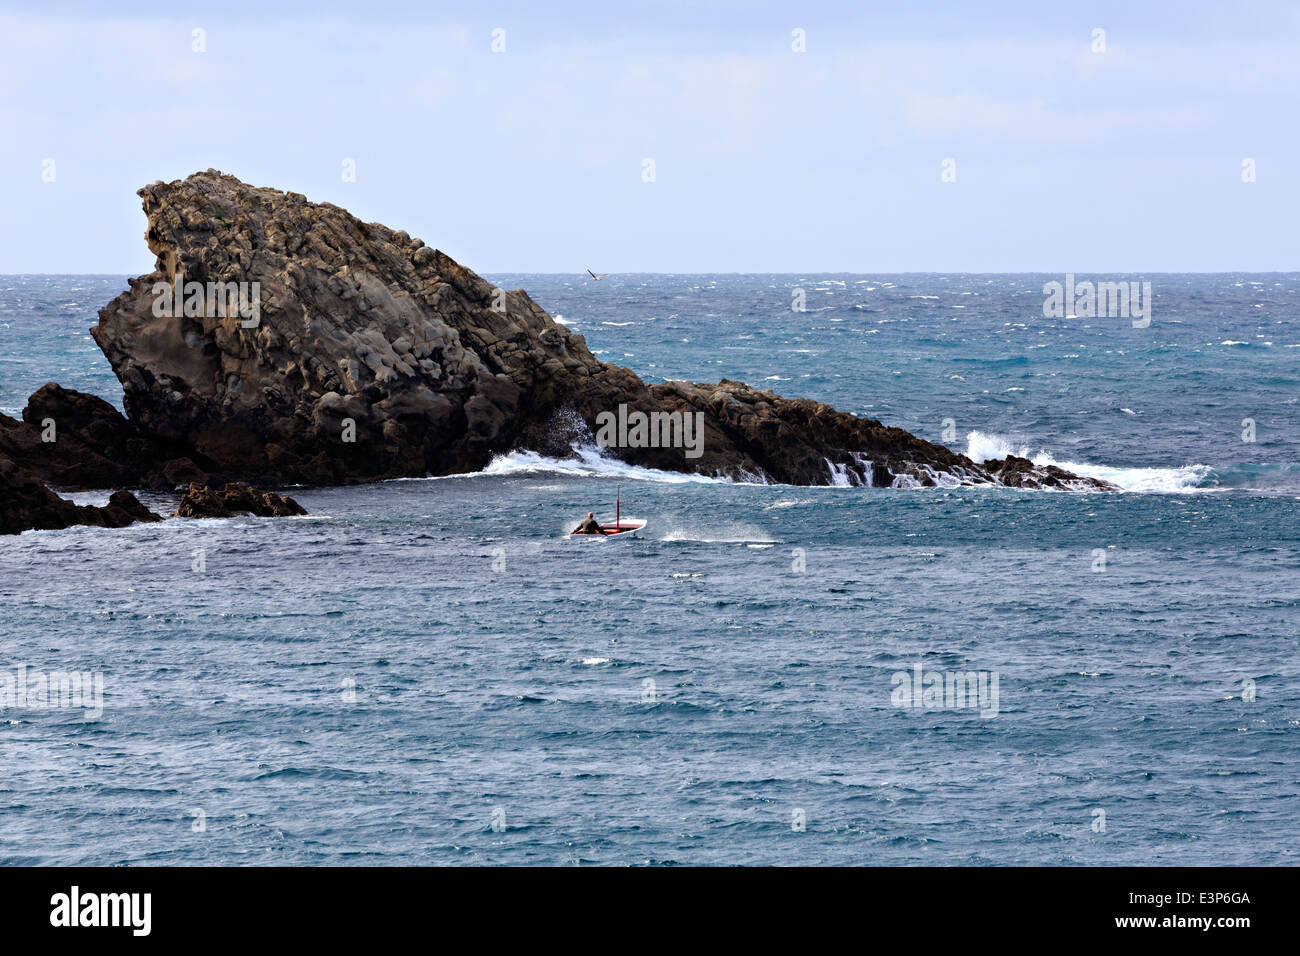 Getaria, Gipuzkoa, Basque Country, Spain. A local fisherman in a small boat braves the rough seas and rocky shoreline. Stock Photo